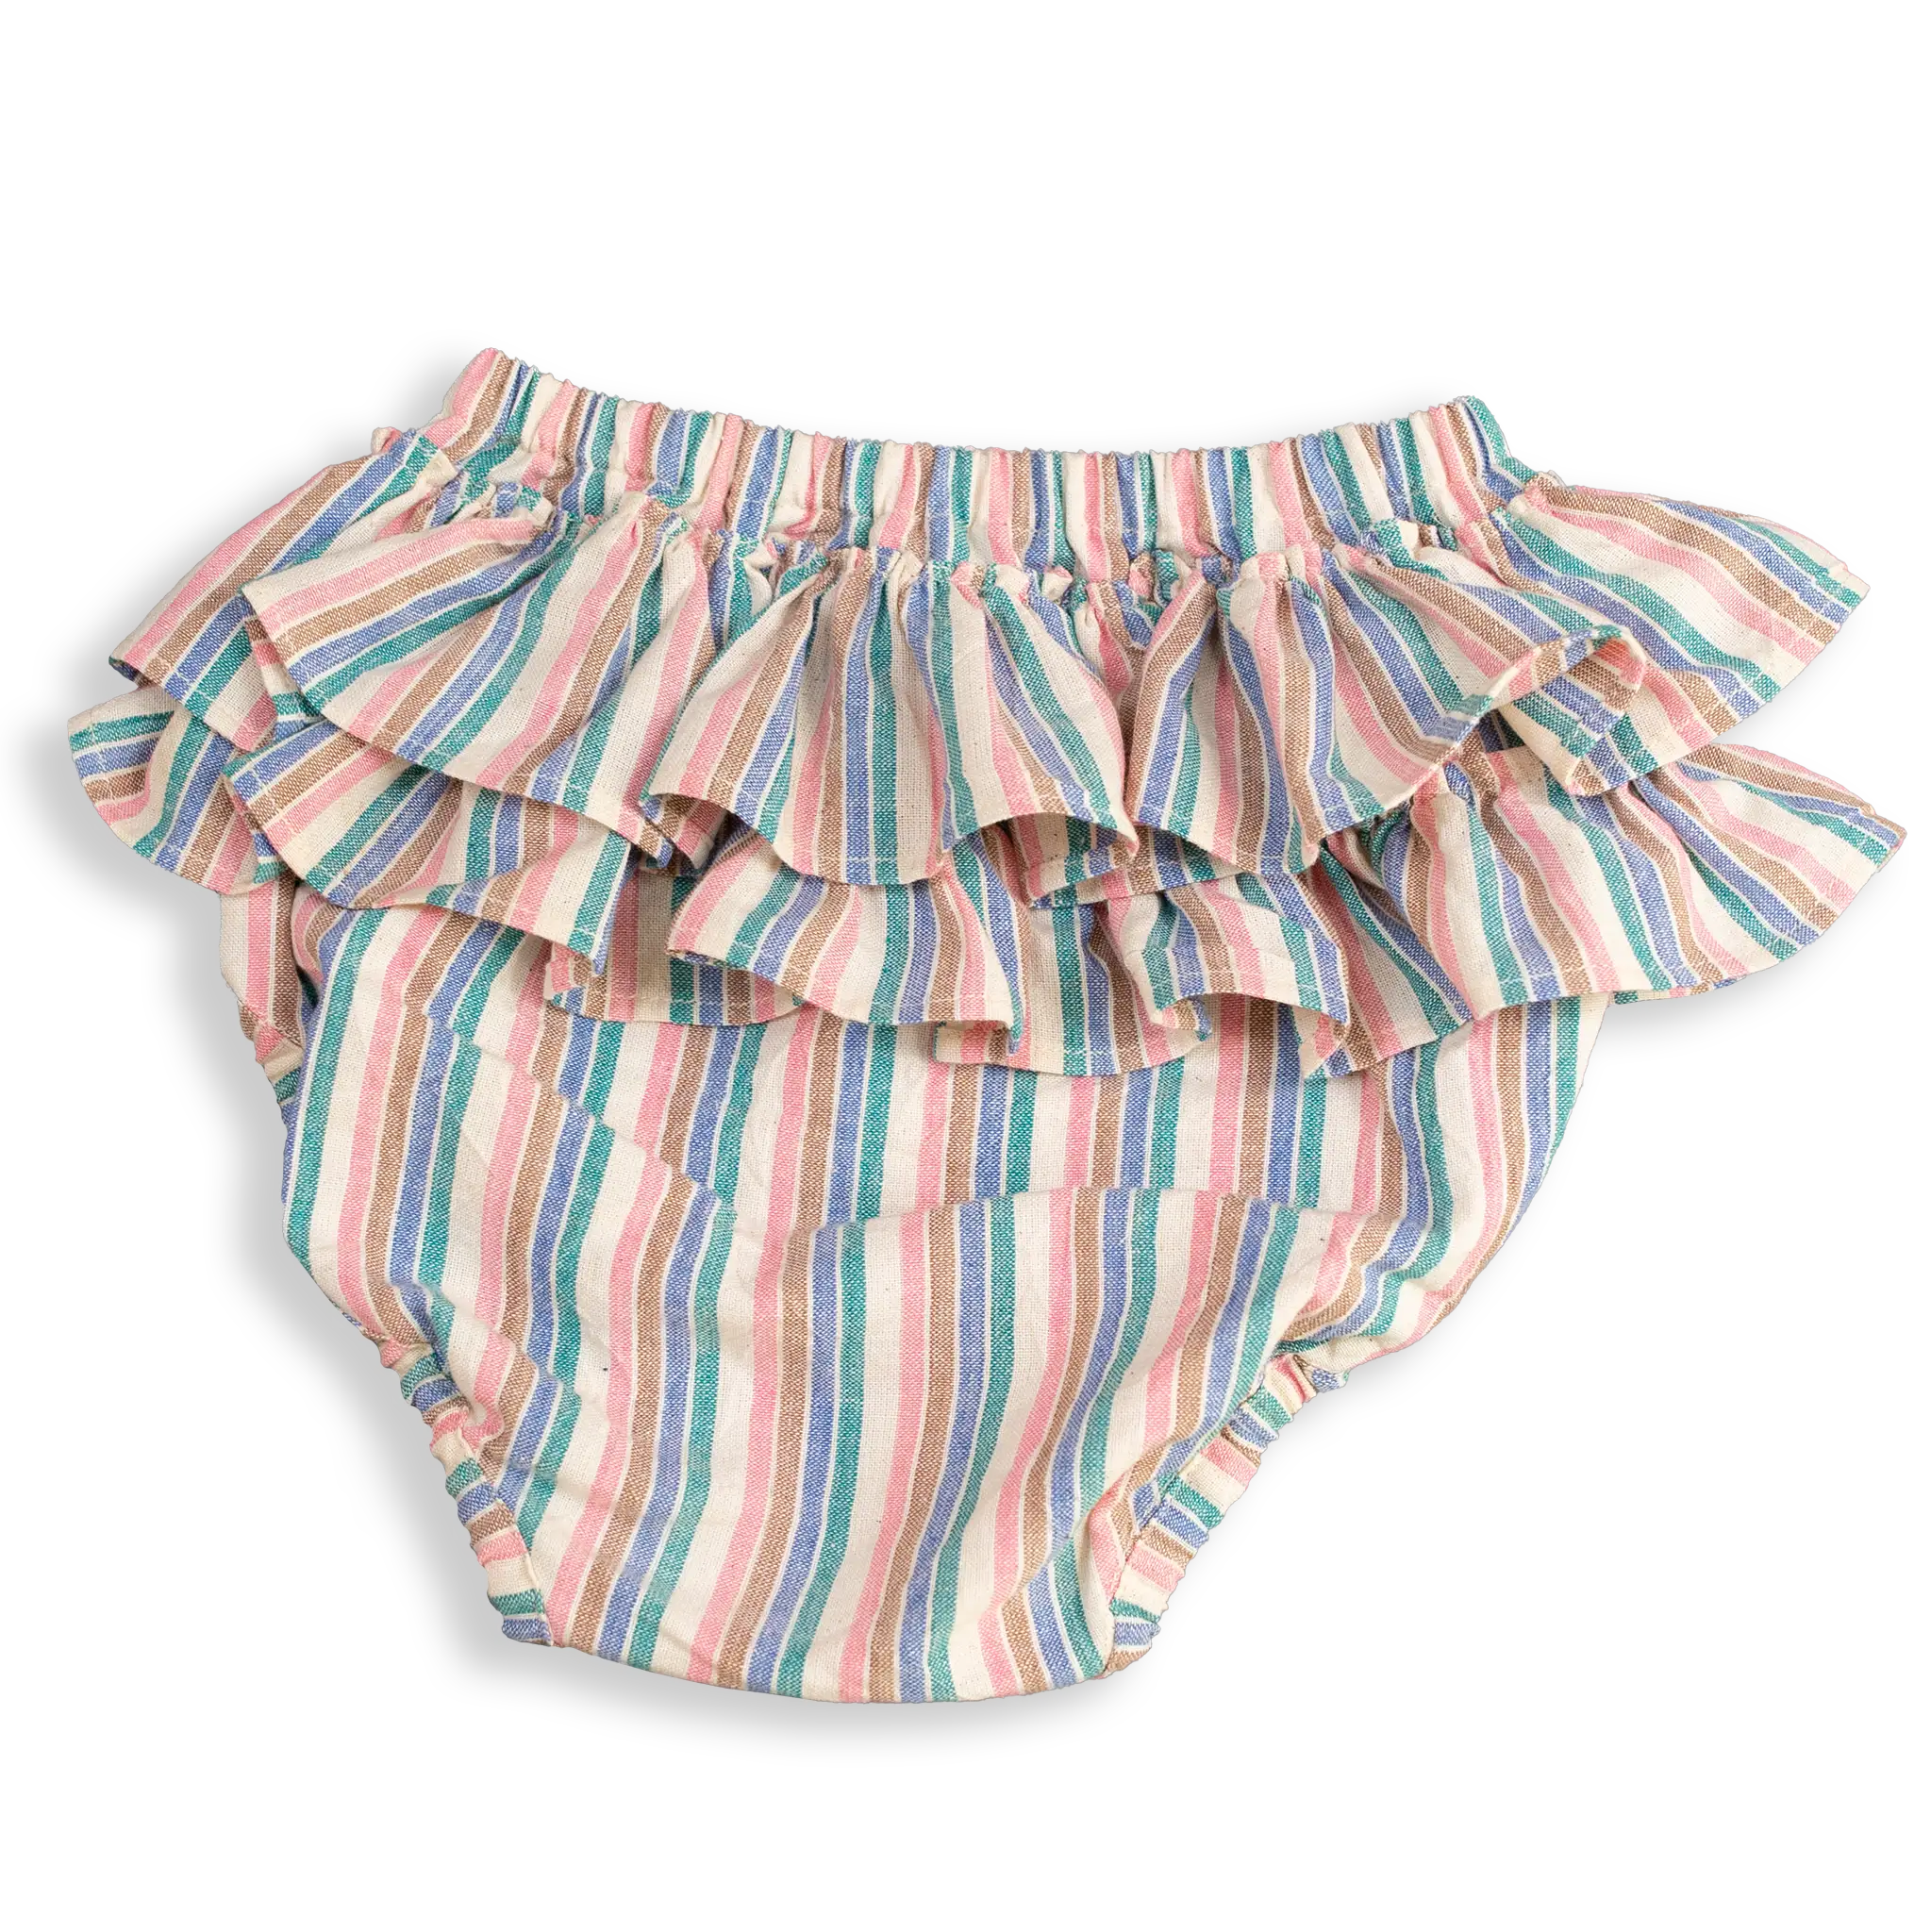 This Bloomer for baby girl is sure to give your sweetheart a frilly good time! Crafted from 100% comfy cotton and lined with mulmul, these stylish bloomers will have her looking cute as a button. 